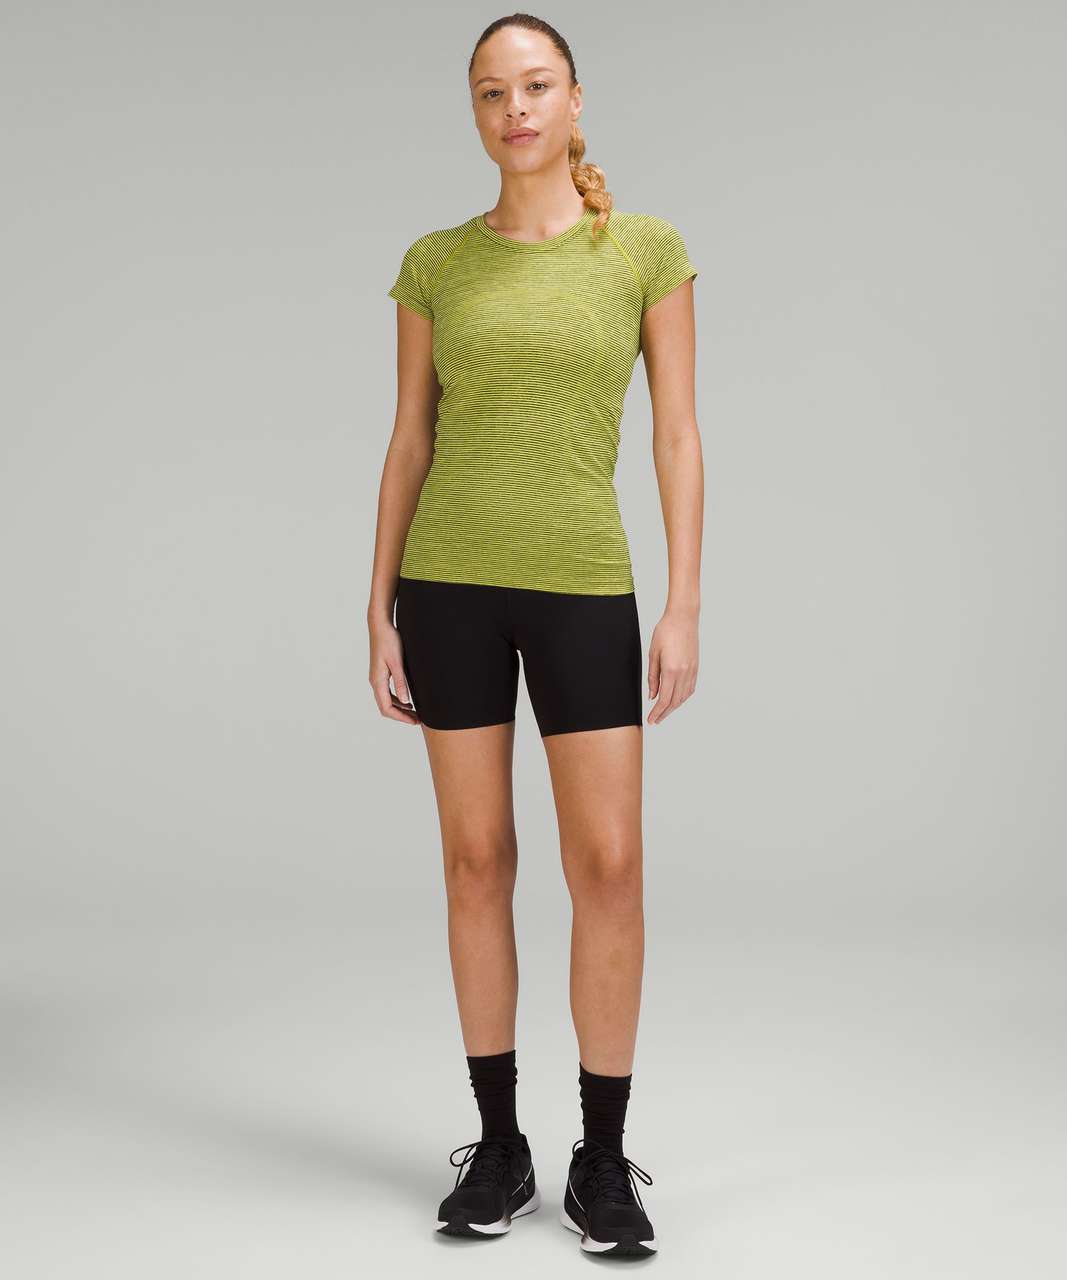 Lululemon Swiftly Tech Short Sleeve Shirt 2.0 - Wee Are From Space Sonic Yellow